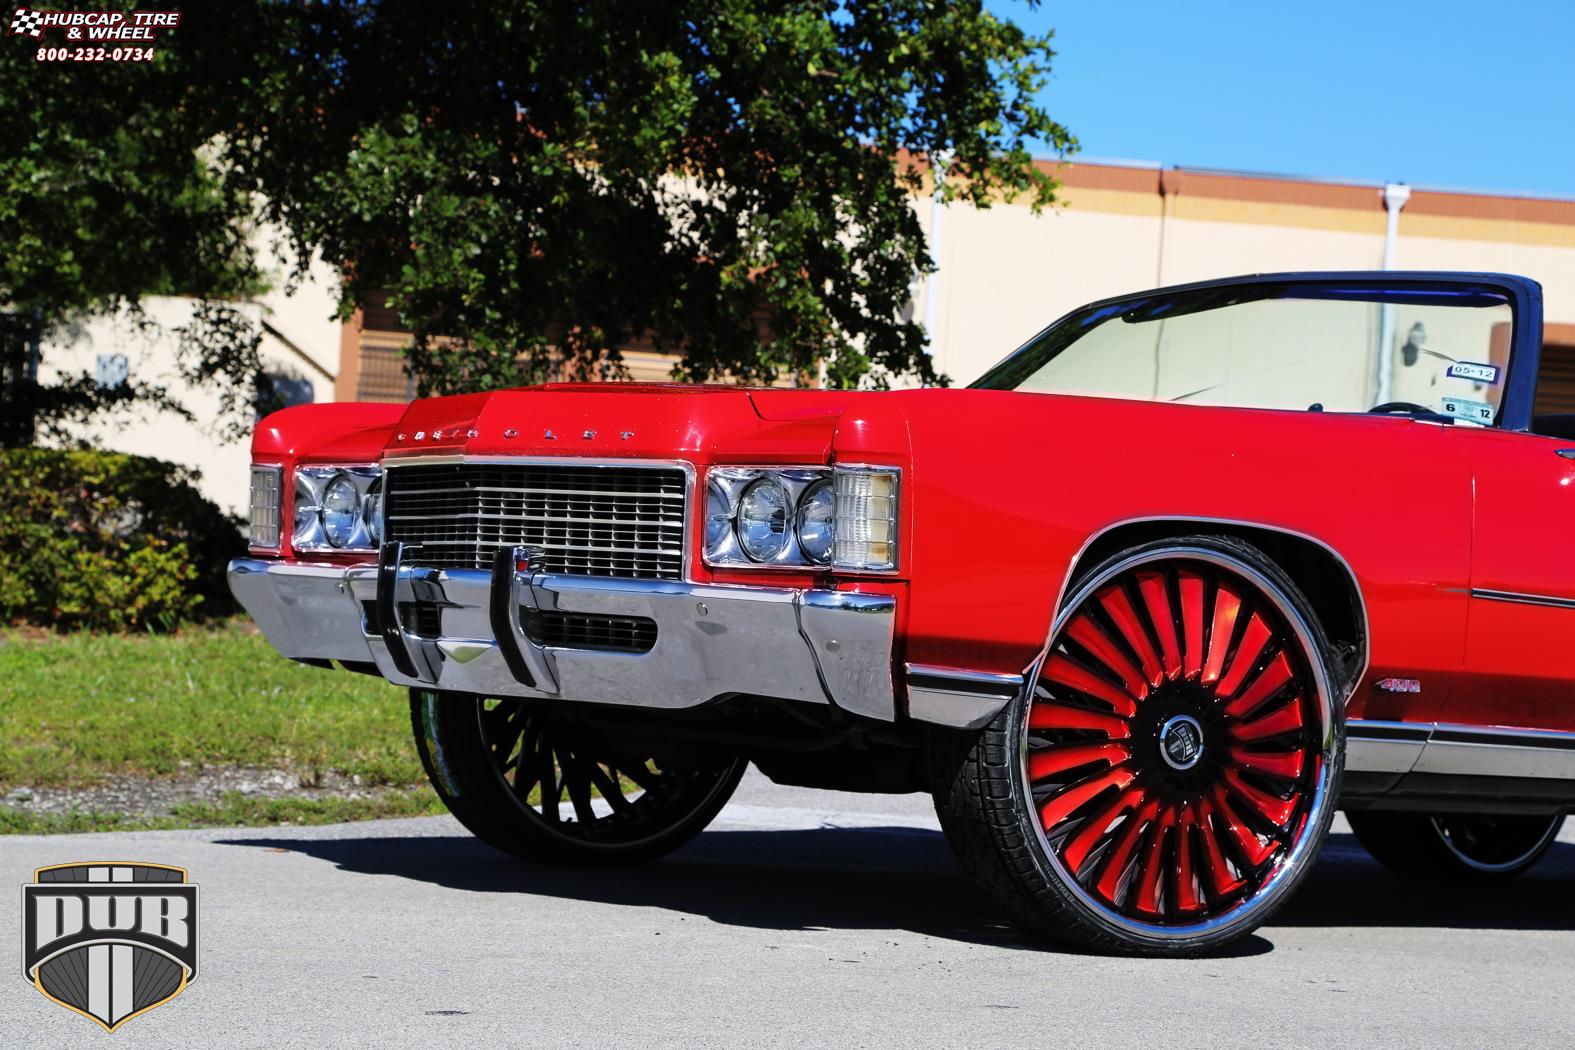 vehicle gallery/chevrolet impala dub s717 turbine  Black w/ red accents wheels and rims